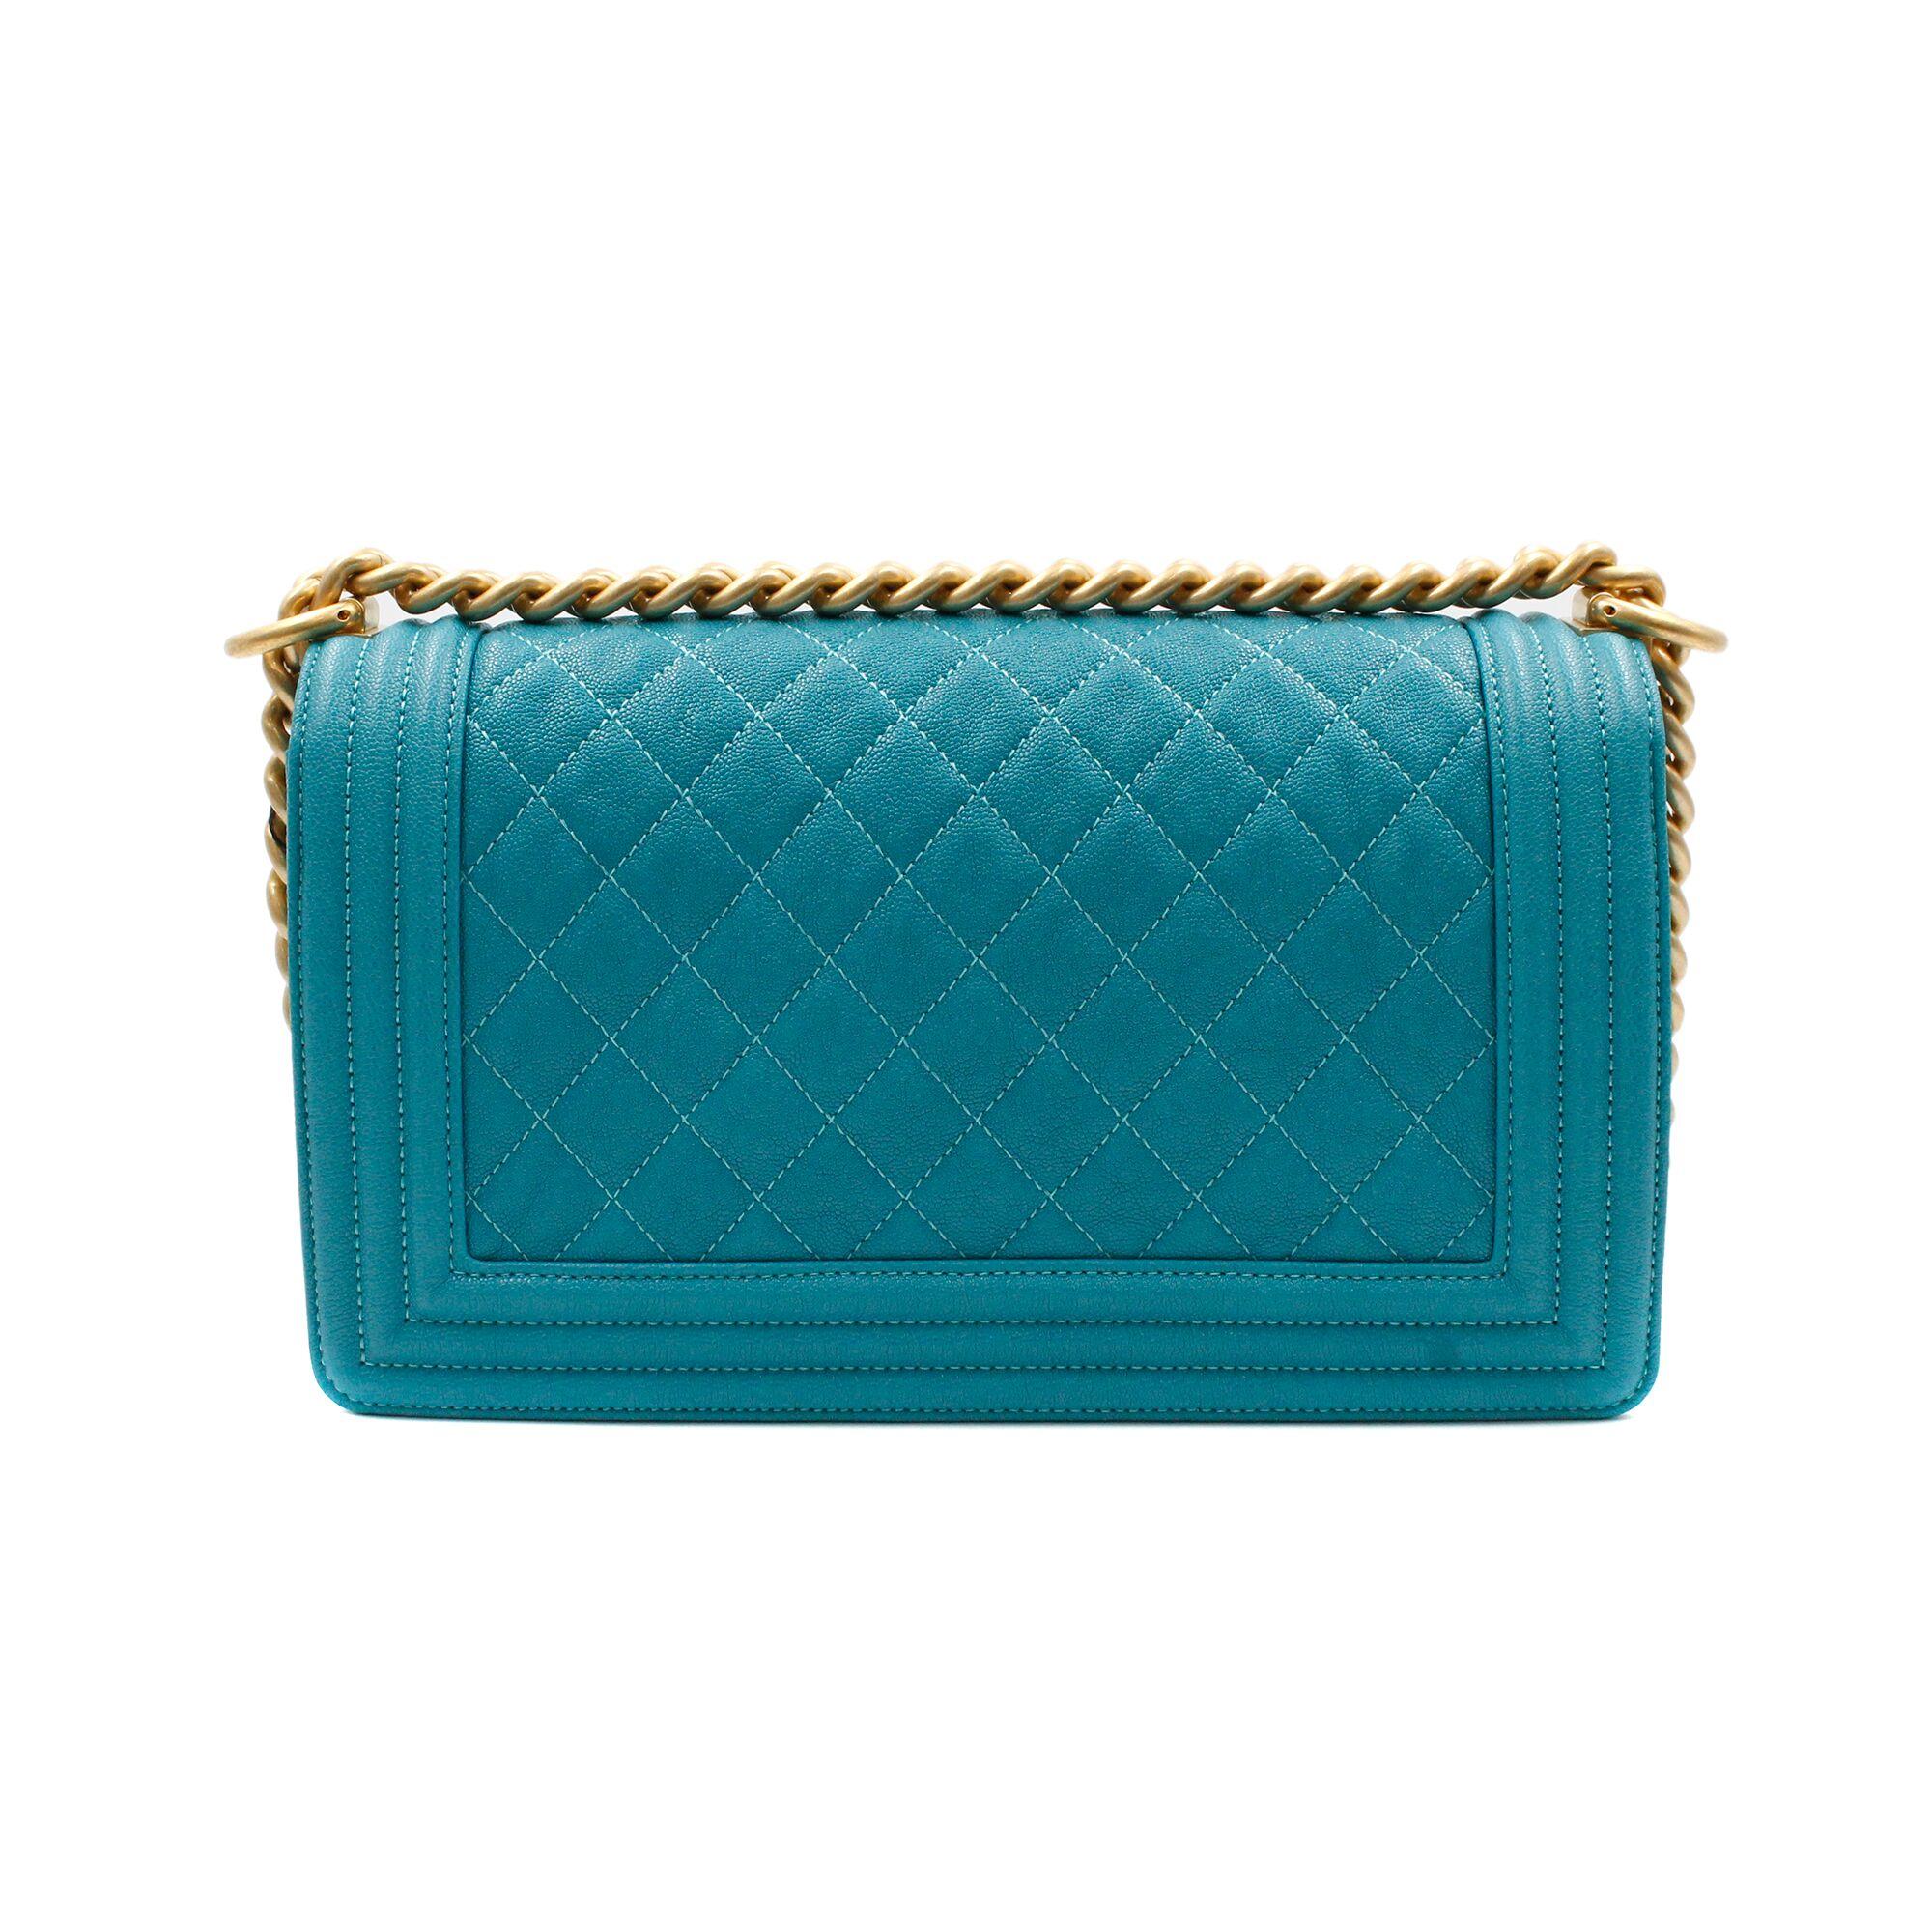 100% Authentic!
Chanel new medium Boy bag of teal quilted caviar (grained calfskin) leather with antique gold tone hardware.This bag features a full front flap with the Le Boy CC push lock closure and an antique gold tone chain link and teal leather